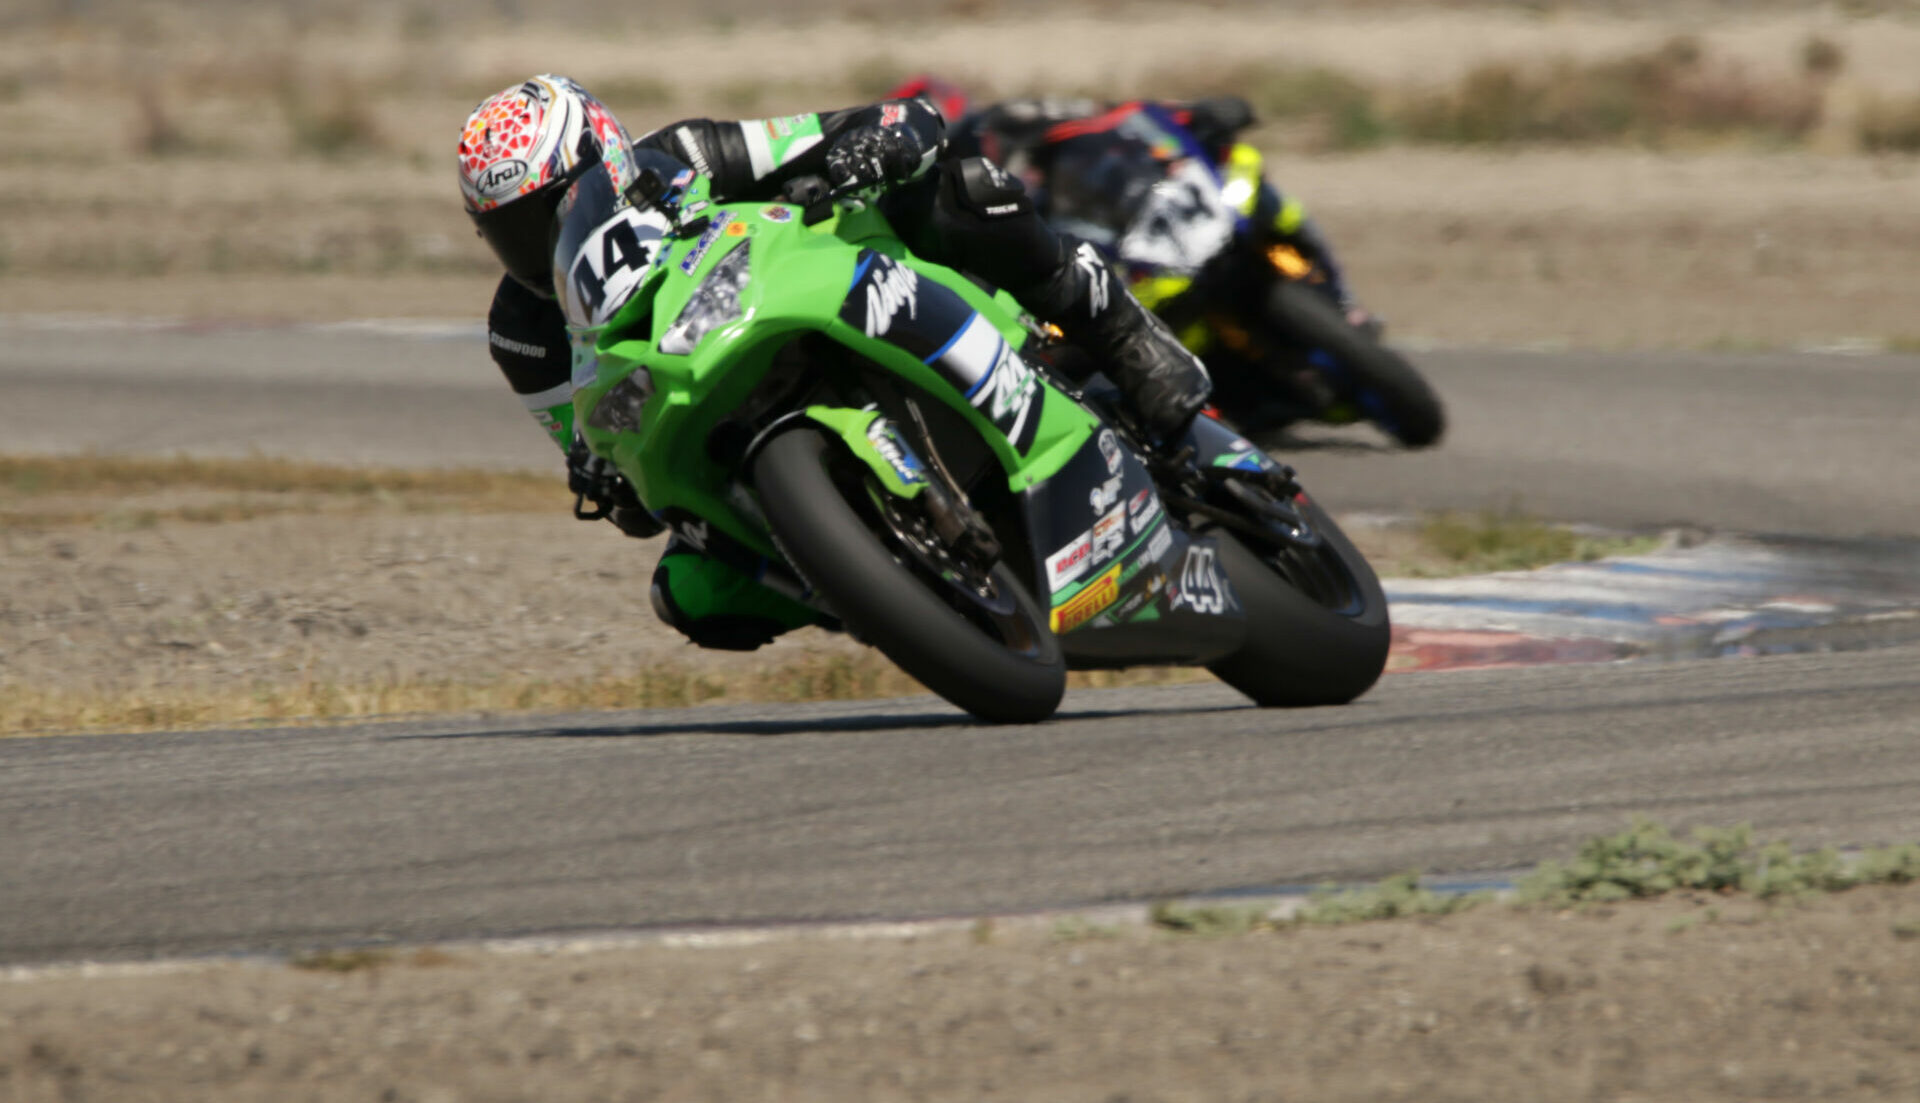 Brenden Ketelsen (44) leads Bryce Prince (74) at Buttonwillow Raceway Park. Photo by Max Klein/OxyMoronPhotography.com, courtesy AFM.